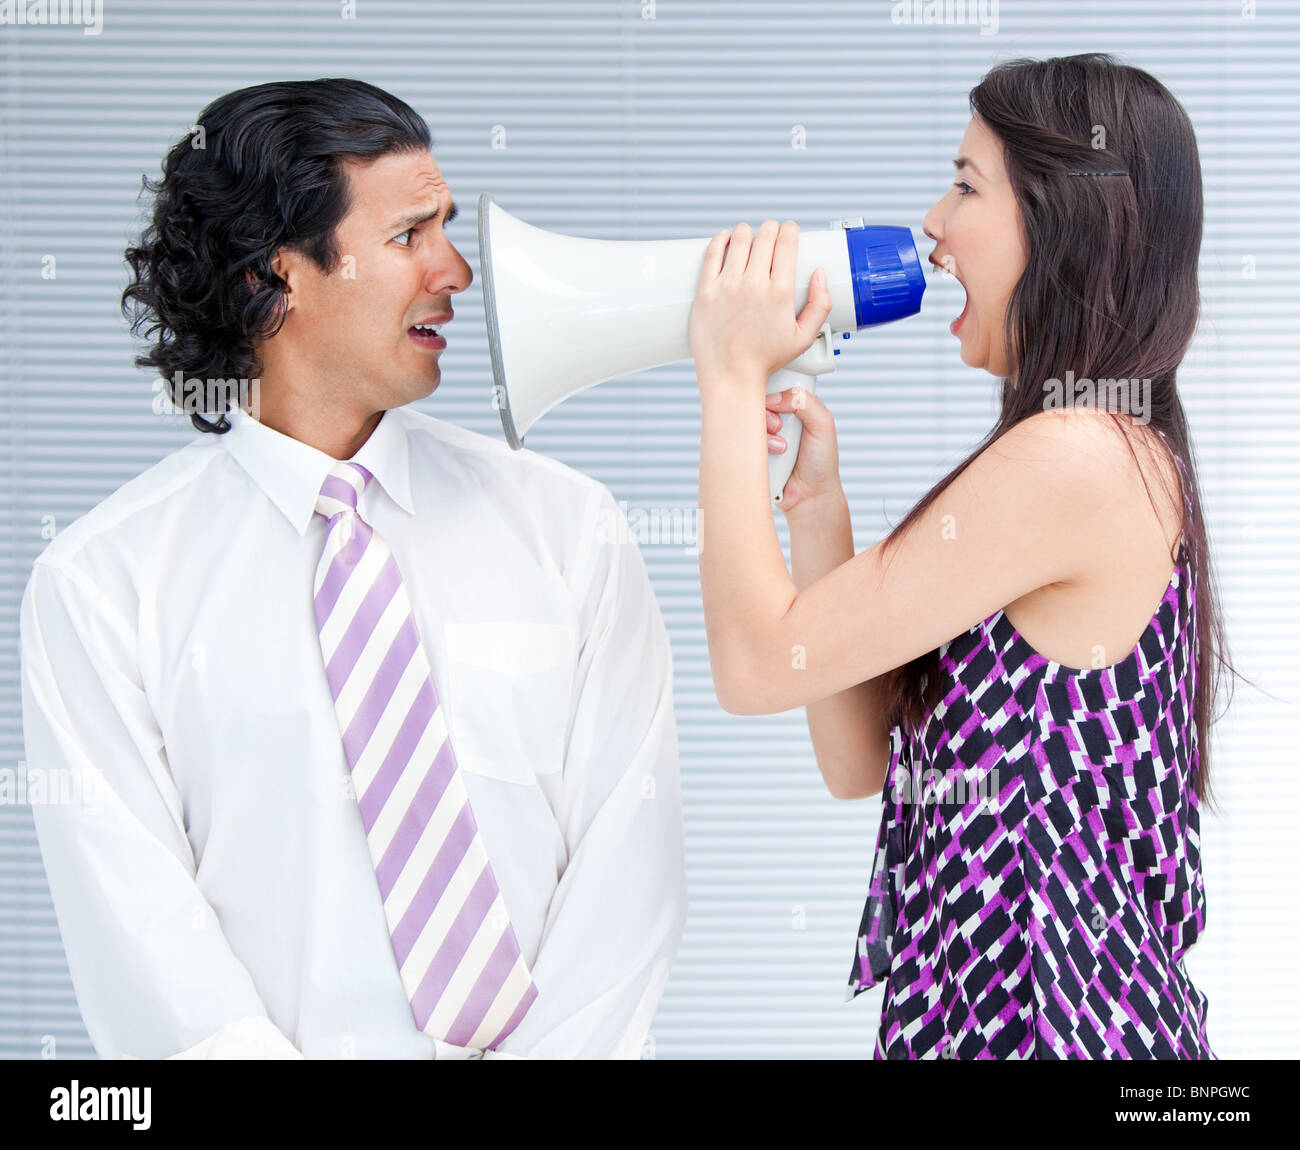 Furious businesswoman yelling through a megaphone Banque D'Images